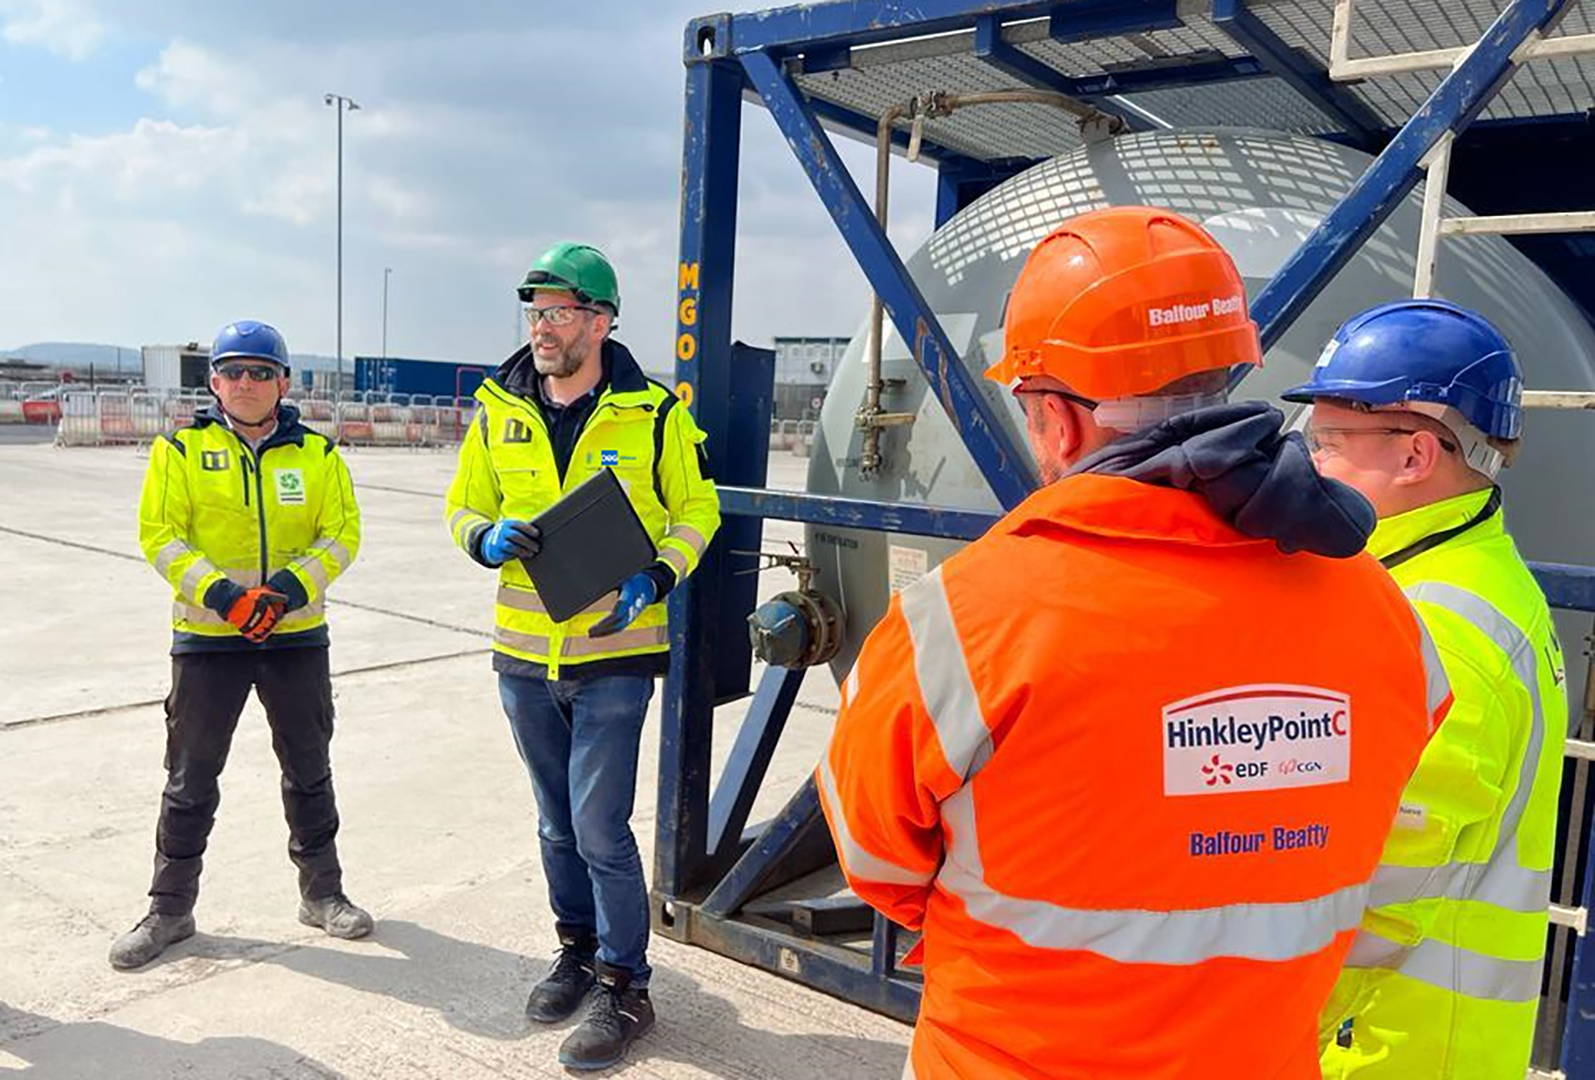 Tank training initiative supports safety culture for Hinkley Point C development